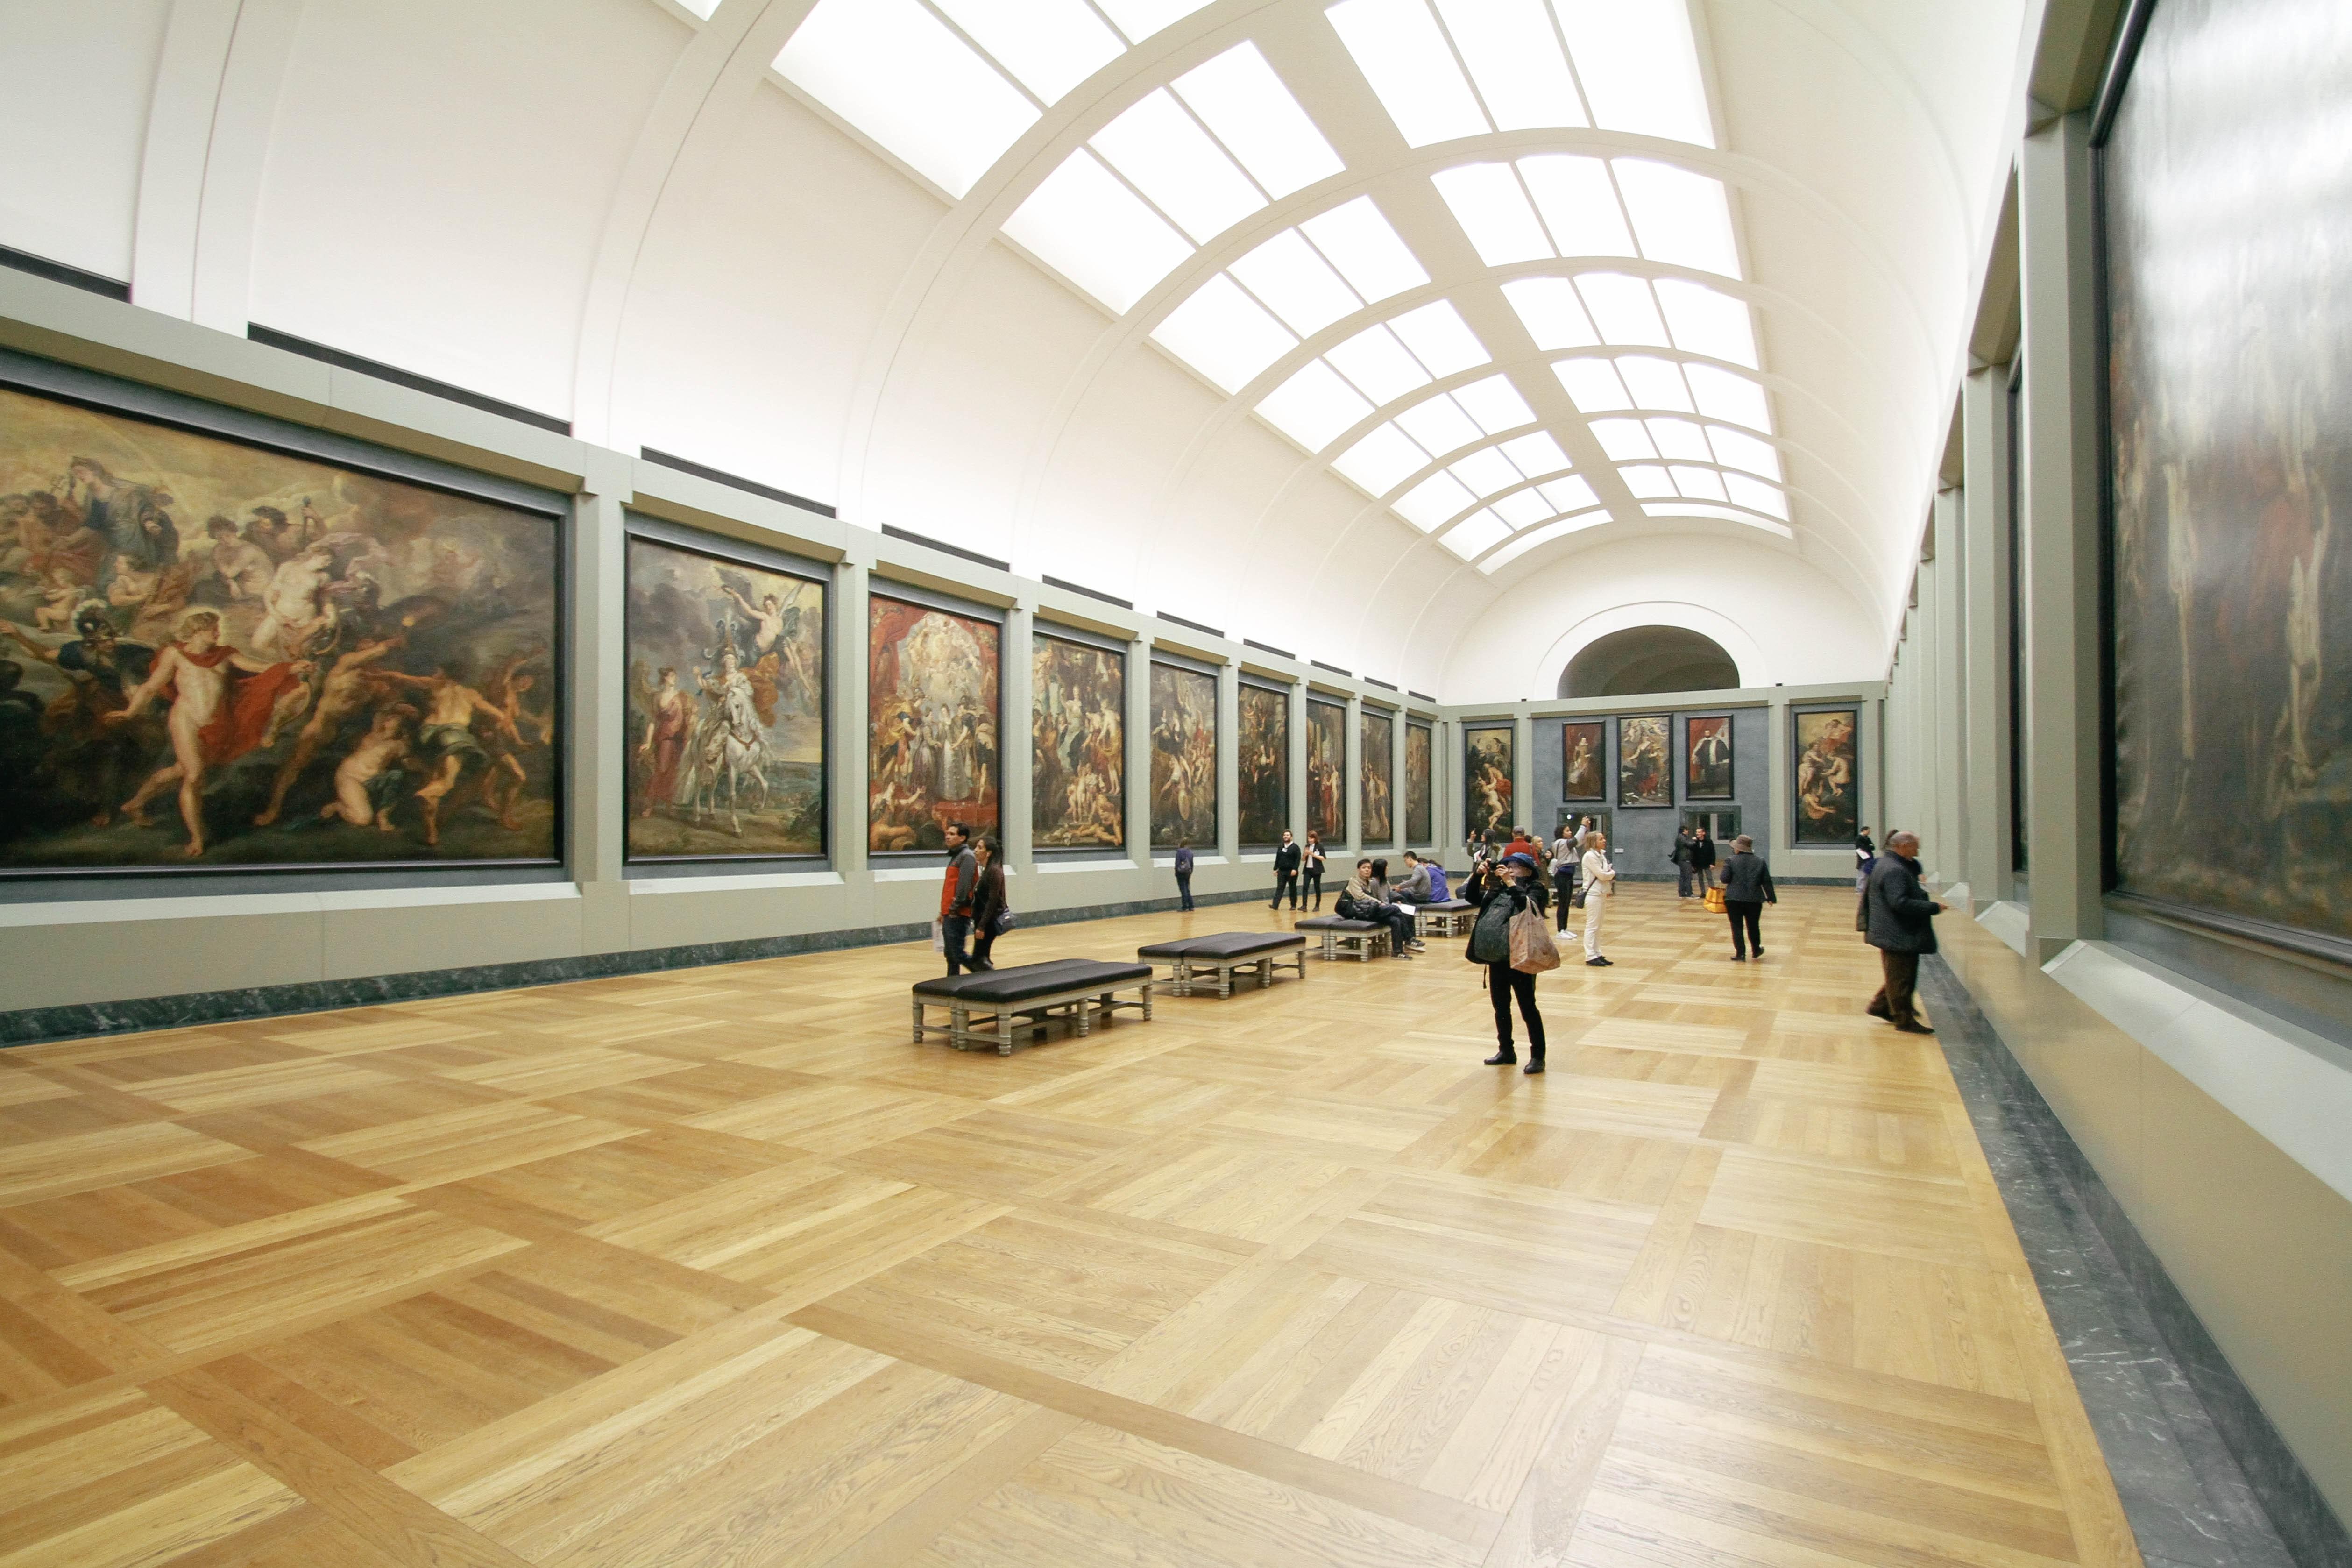 A dozen world famous museums are offering virtual tours for those stuck at home